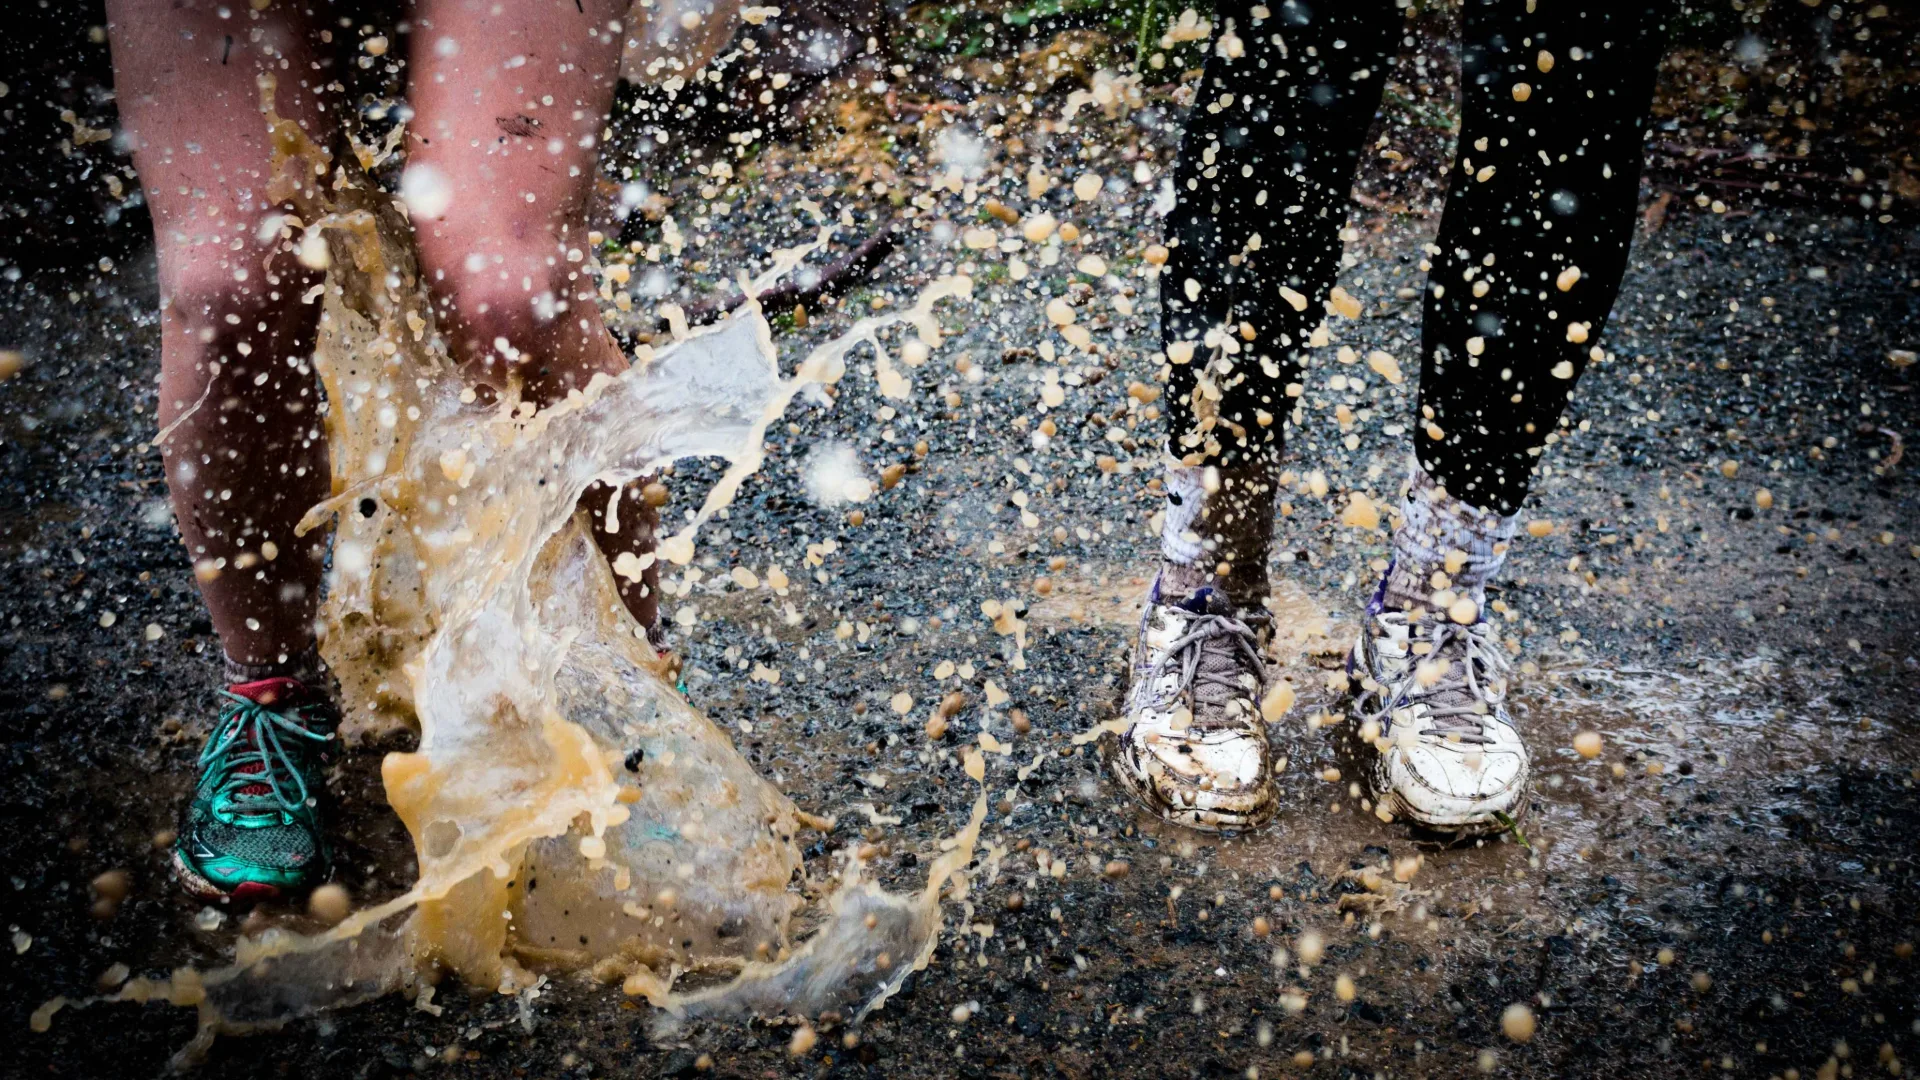 Two people wearing trainers jumping in a muddy puddle